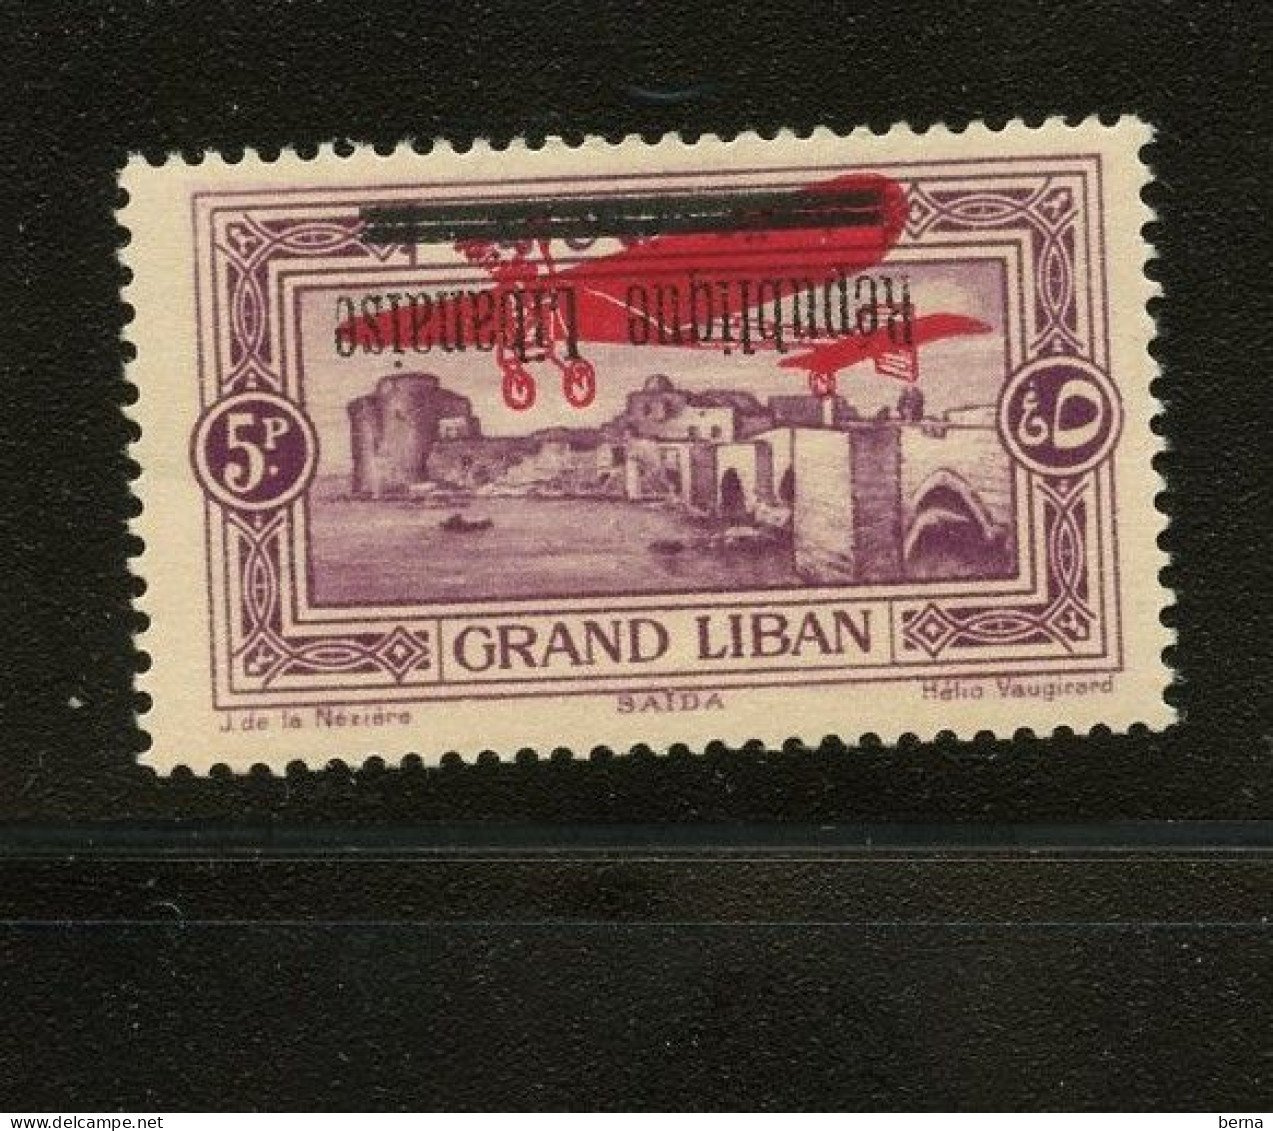 GRAND LIBAN POSTE AREIENNE 23a SURCHARGE RENVERSEE LUXE NEUF SANS CHARNIERE - Airmail